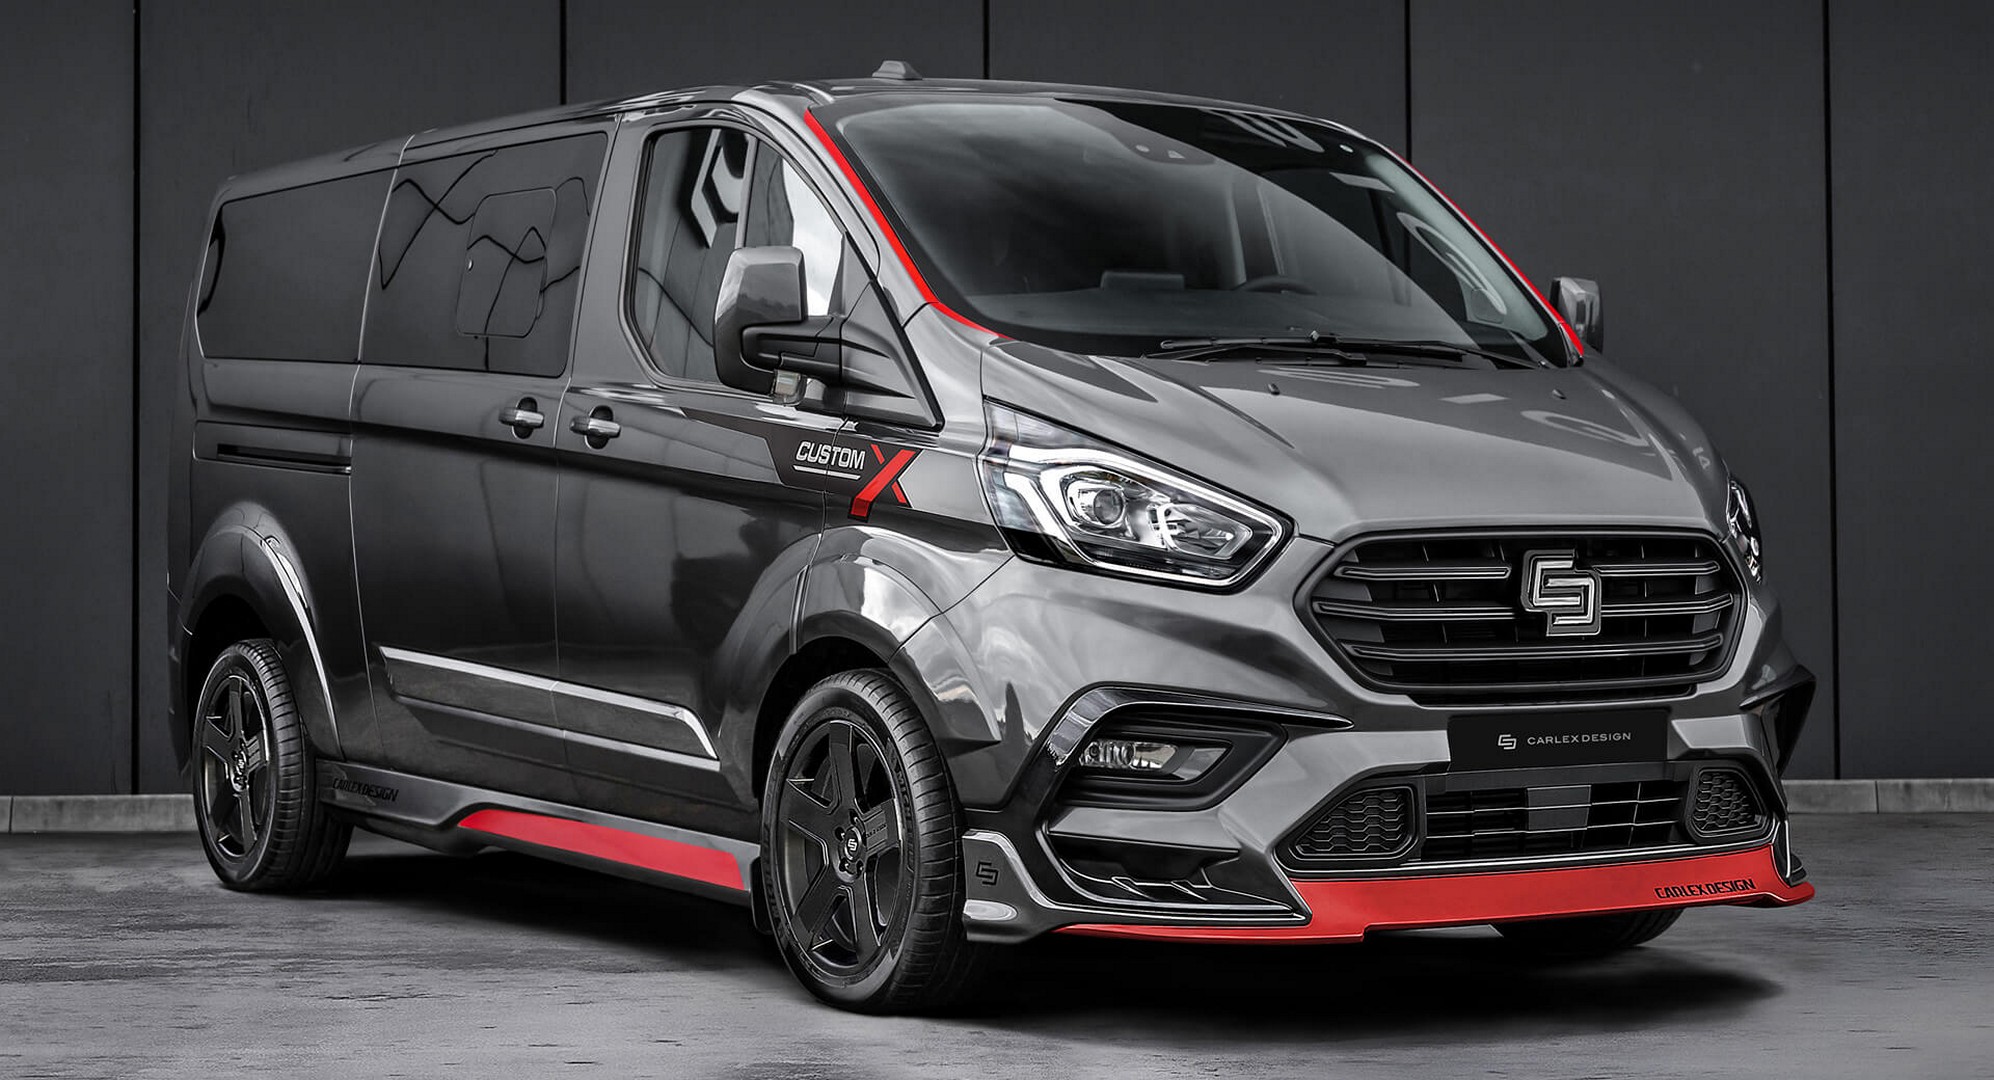 Ford Transit Looks Like a Focus RS Race Van Thanks to Carlex Body